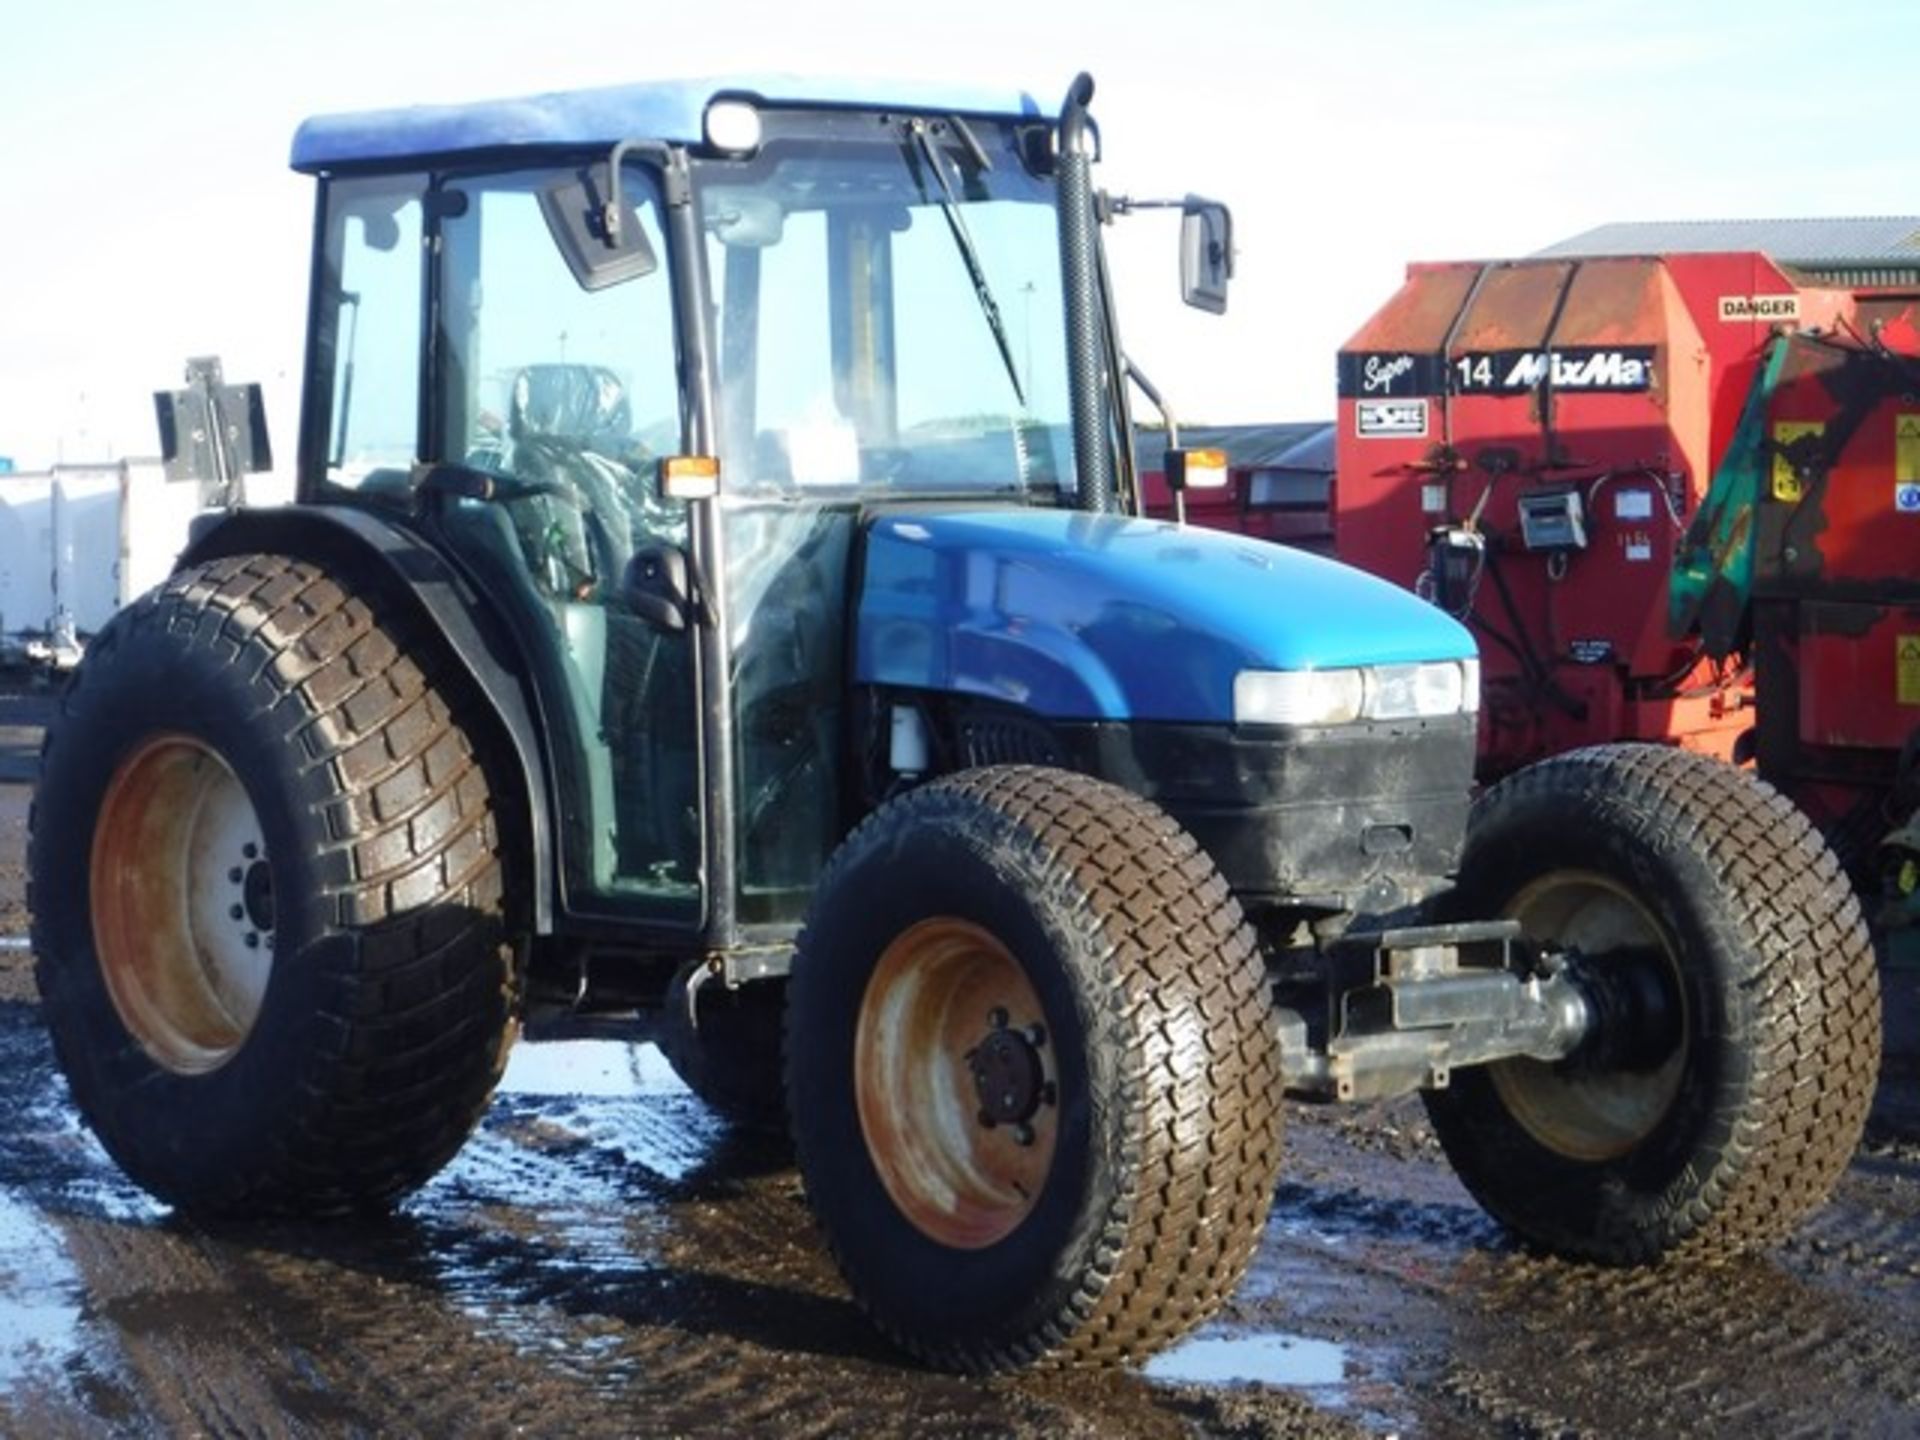 NEW HOLLAND TRACTOR C/W REAR PTO 1727HRS (CORRECT) REG - AW02AUT YEAR 2002